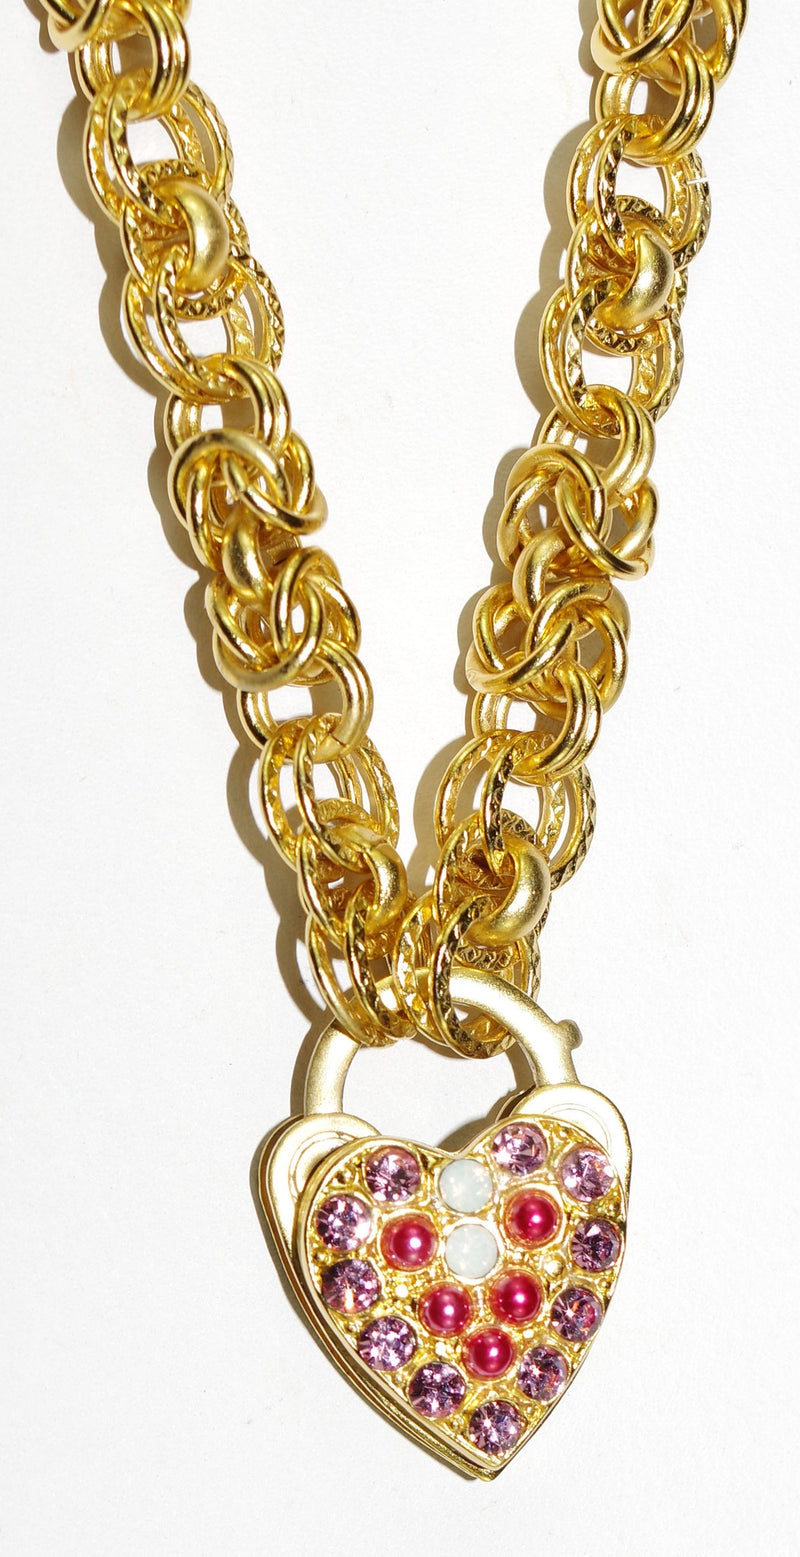 MARIANA NECKLACE PINK MUSK: pink, white stones in yellow gold setting, 1" charm, 20" adjustable chain